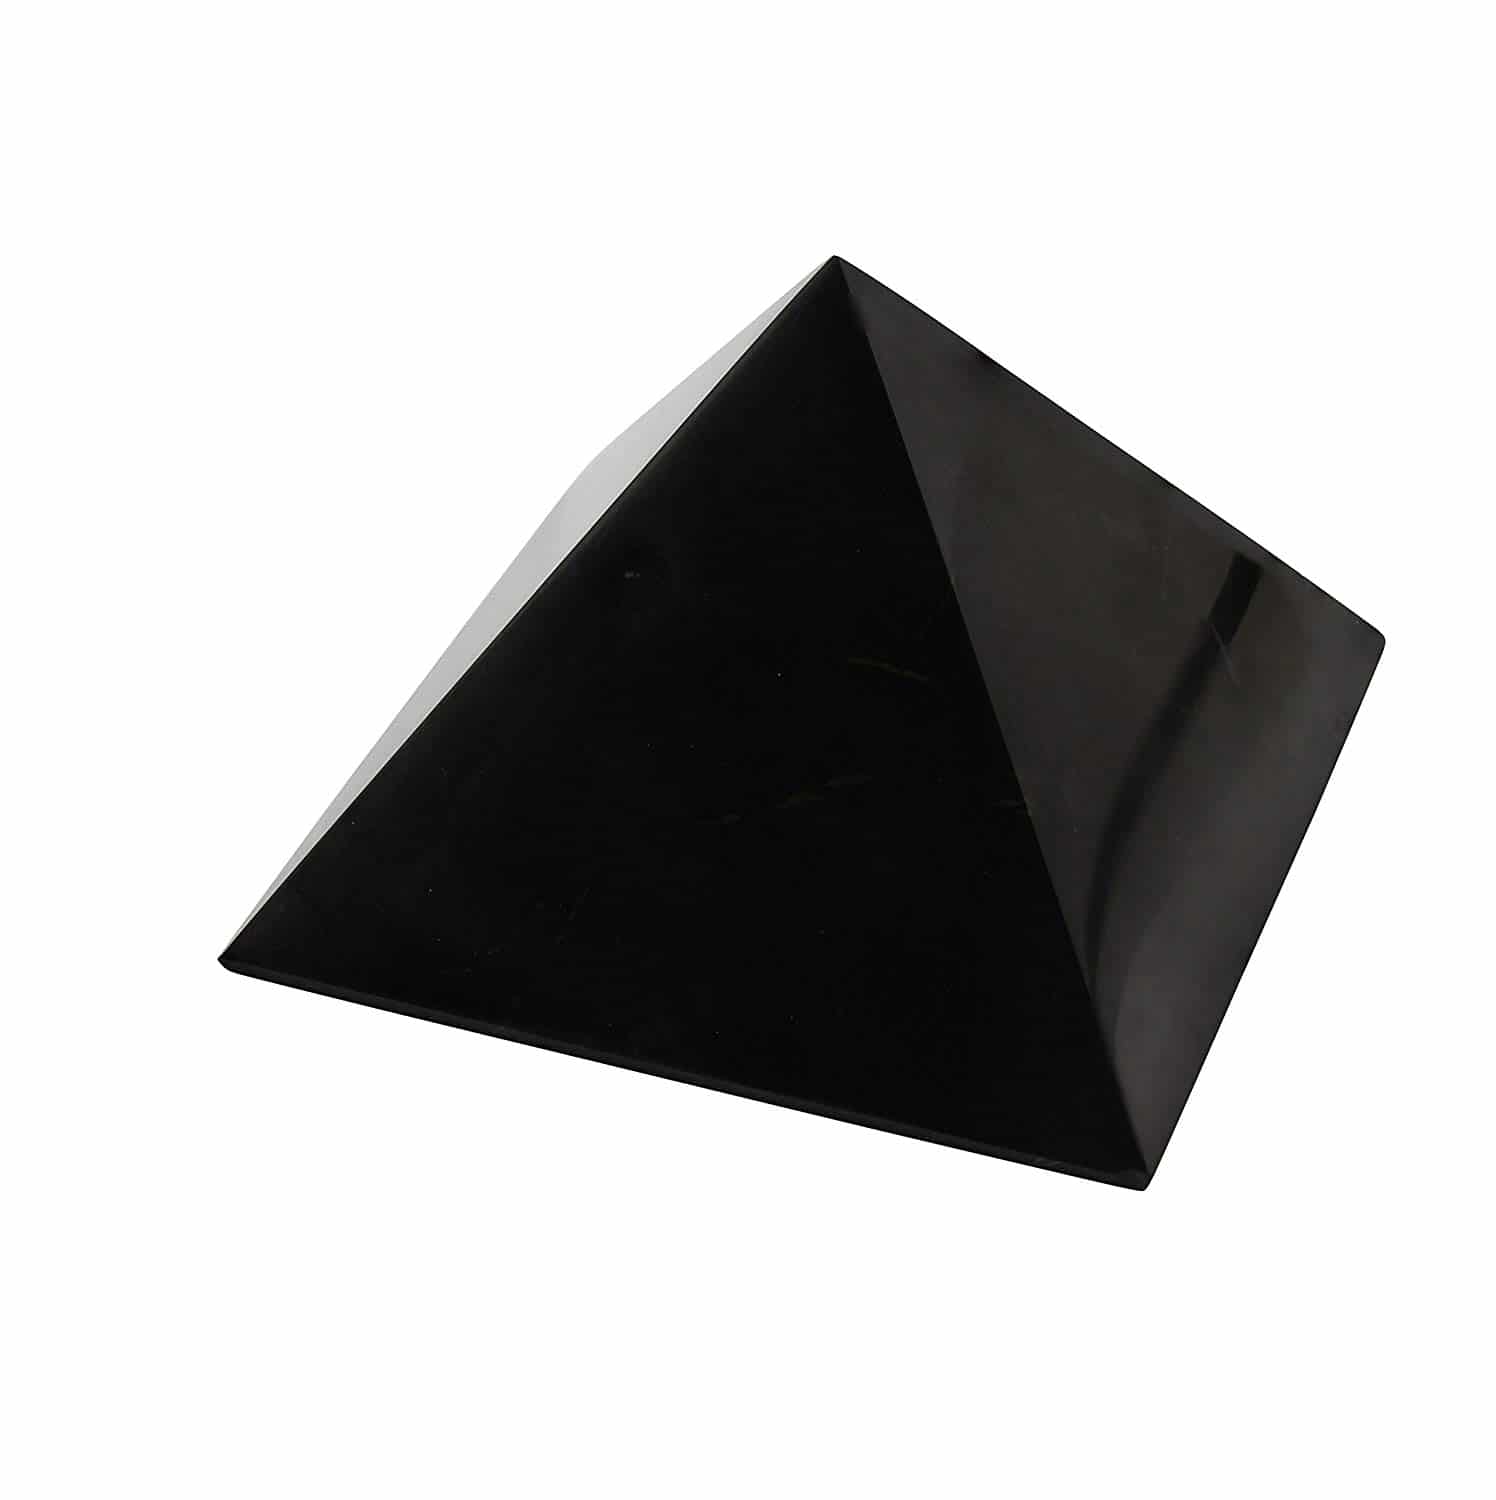 A Shungite Pyramid is a wonderufl crystal to place on your desk to clear EMF's and provide a wonderful energy.